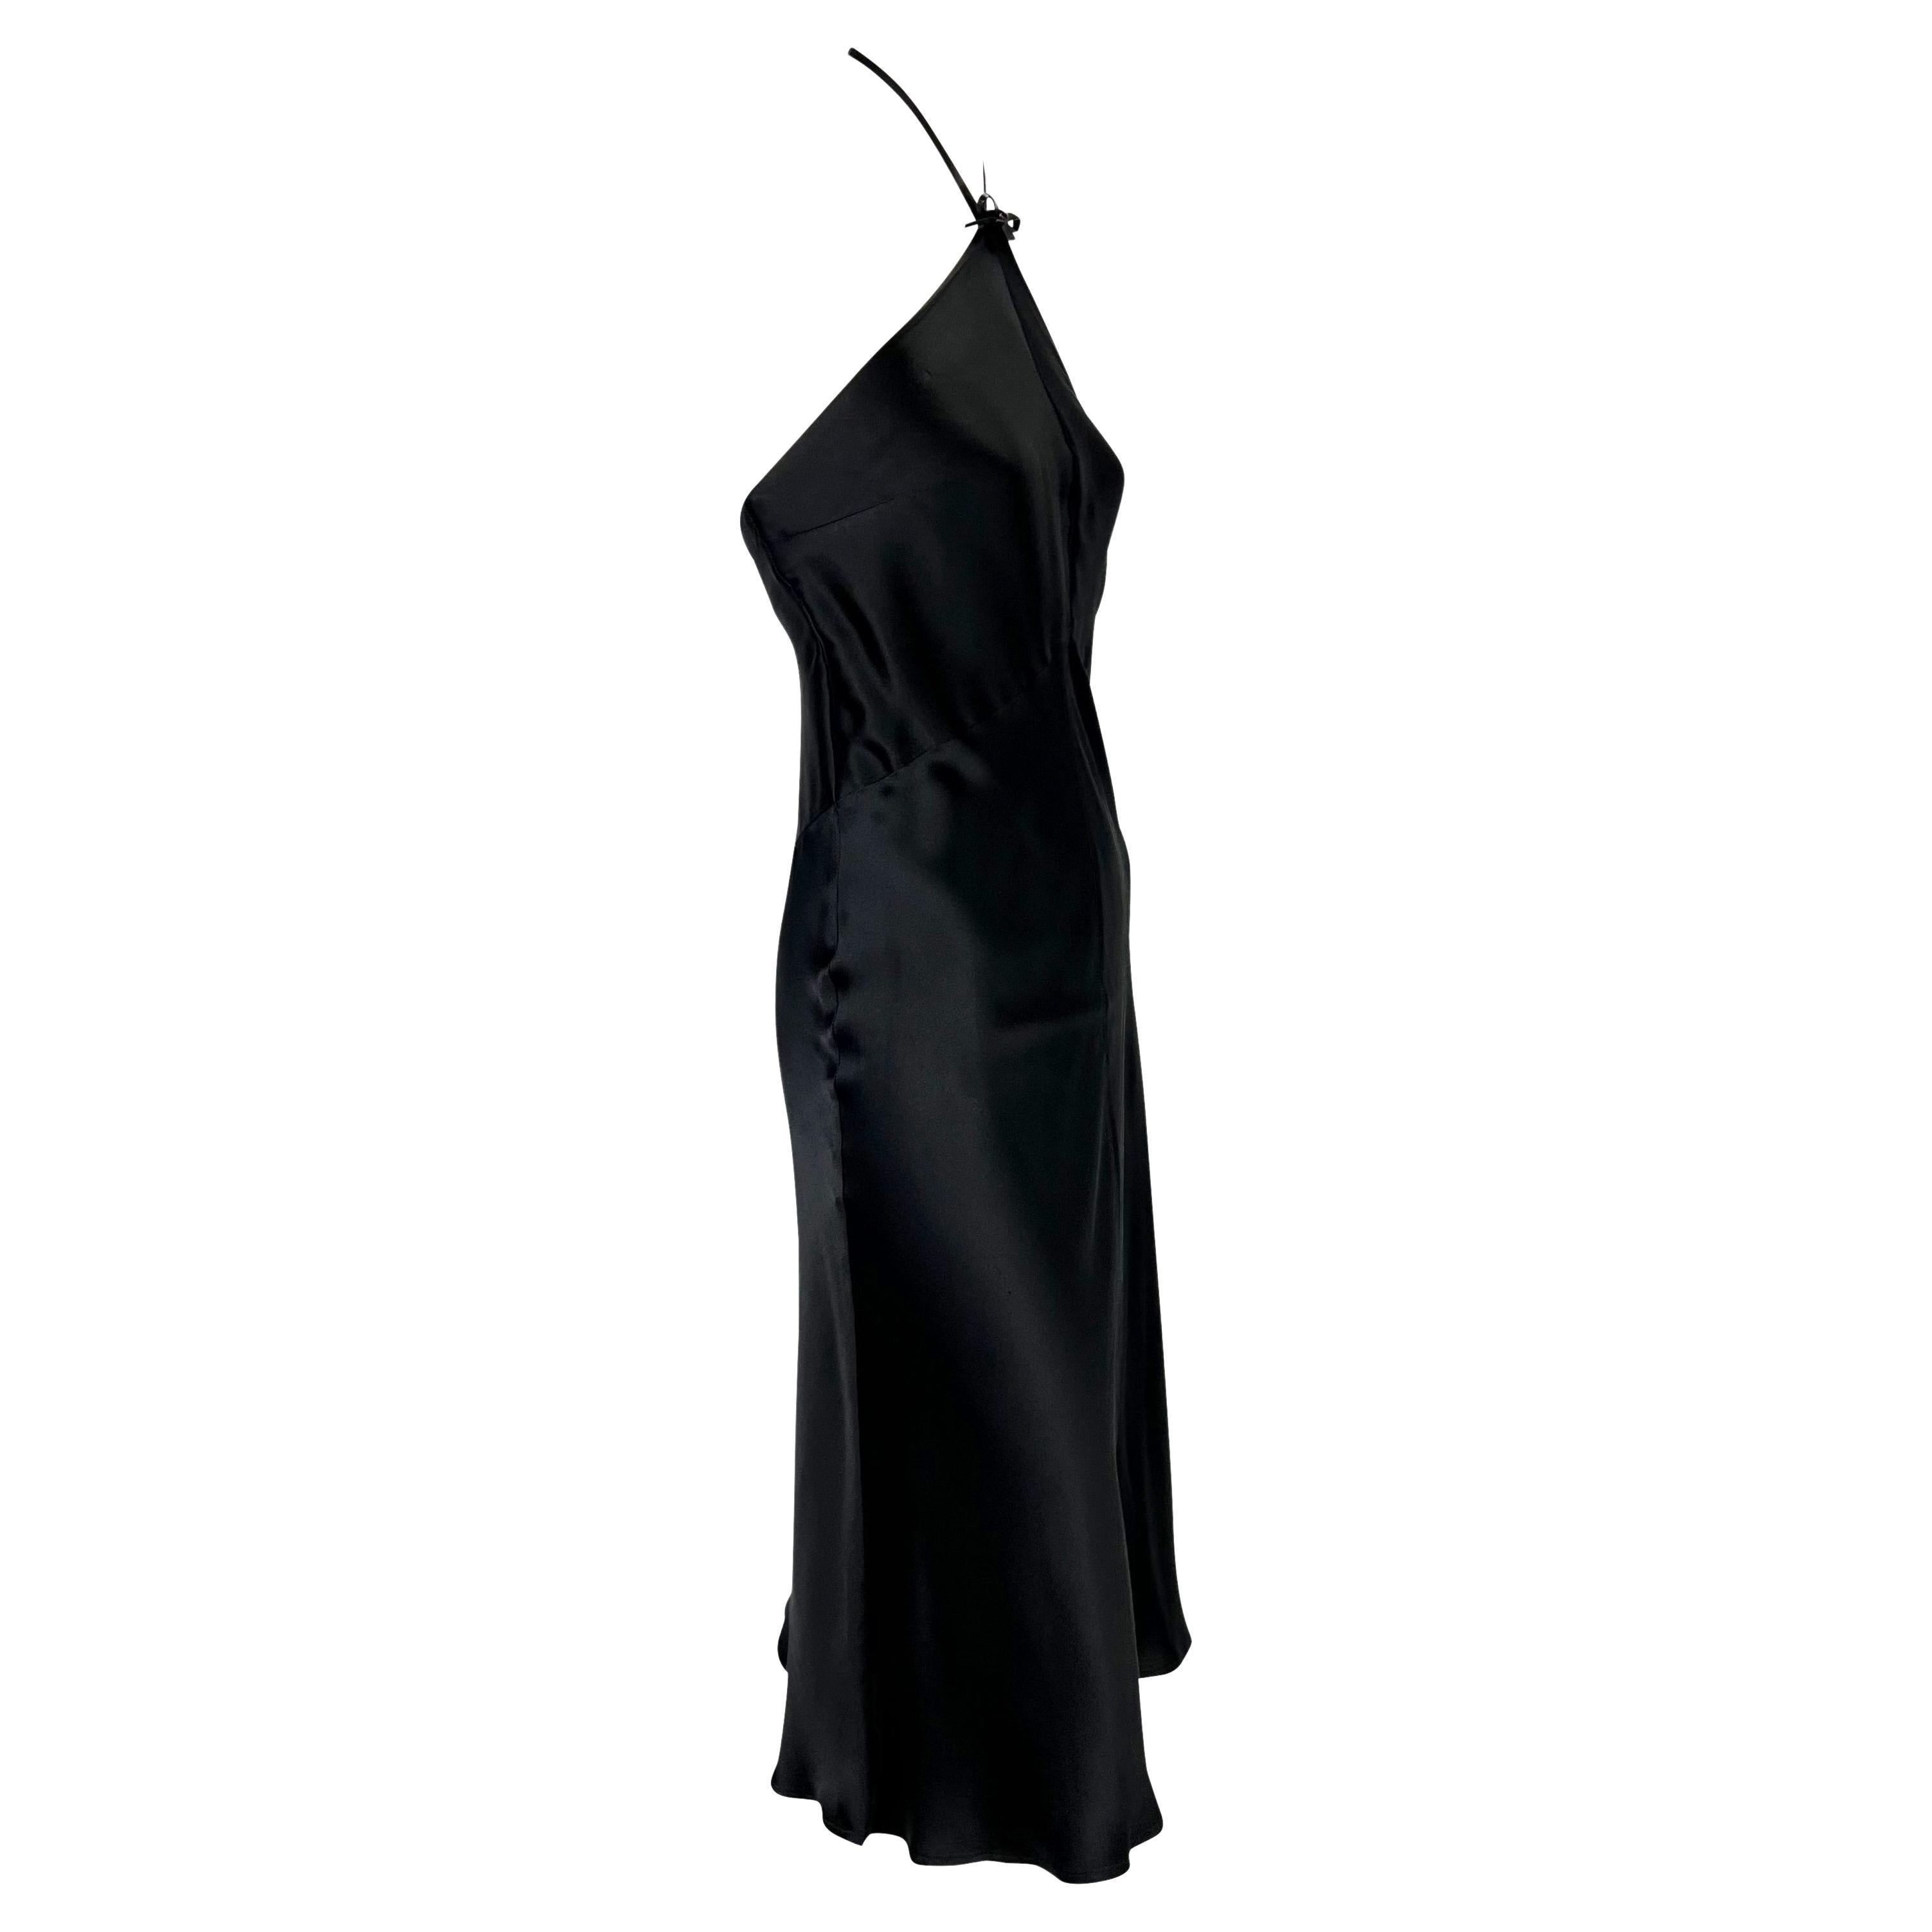 S/S 2000 Gucci by Tom Ford Black Silk Satin Leather Bow Halter Flare Dress 2